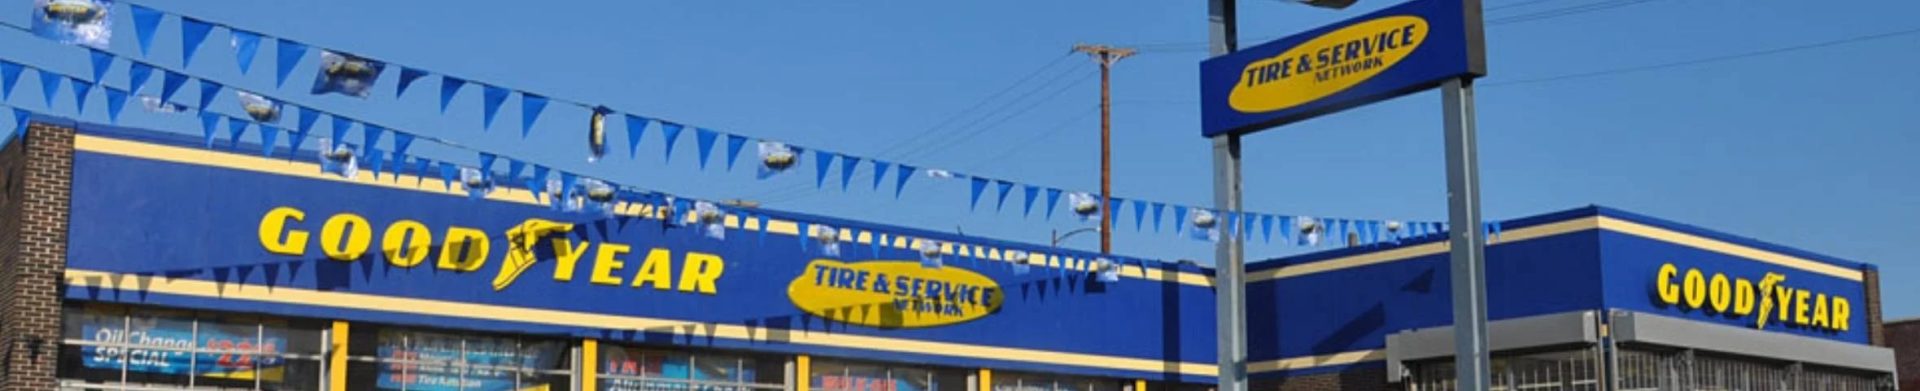 Goodyear storefront in the day